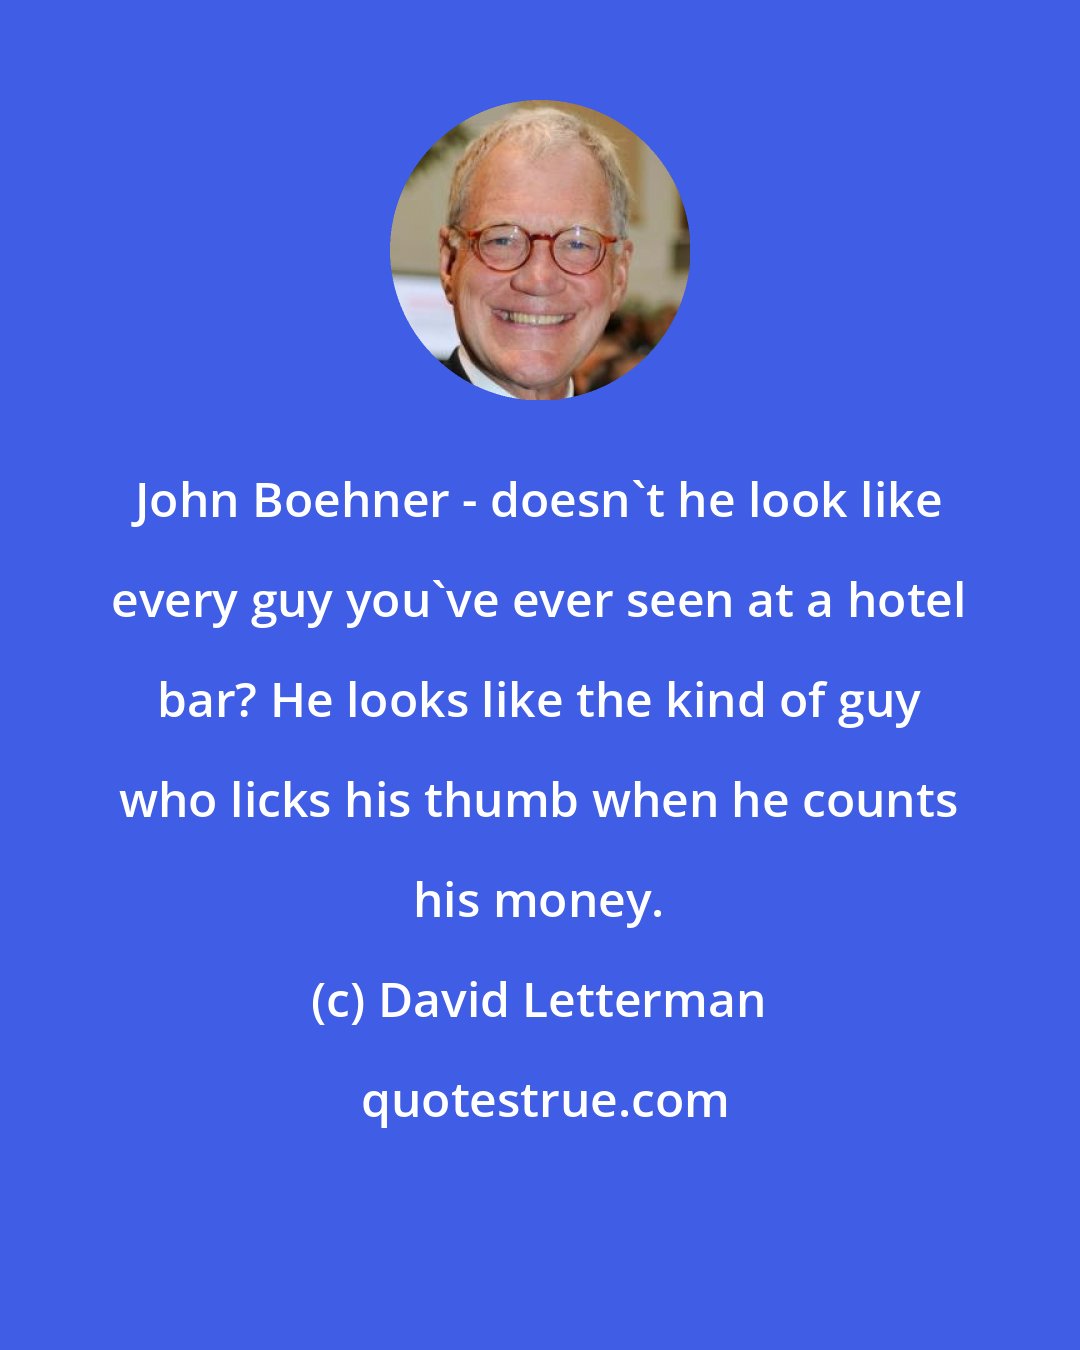 David Letterman: John Boehner - doesn't he look like every guy you've ever seen at a hotel bar? He looks like the kind of guy who licks his thumb when he counts his money.